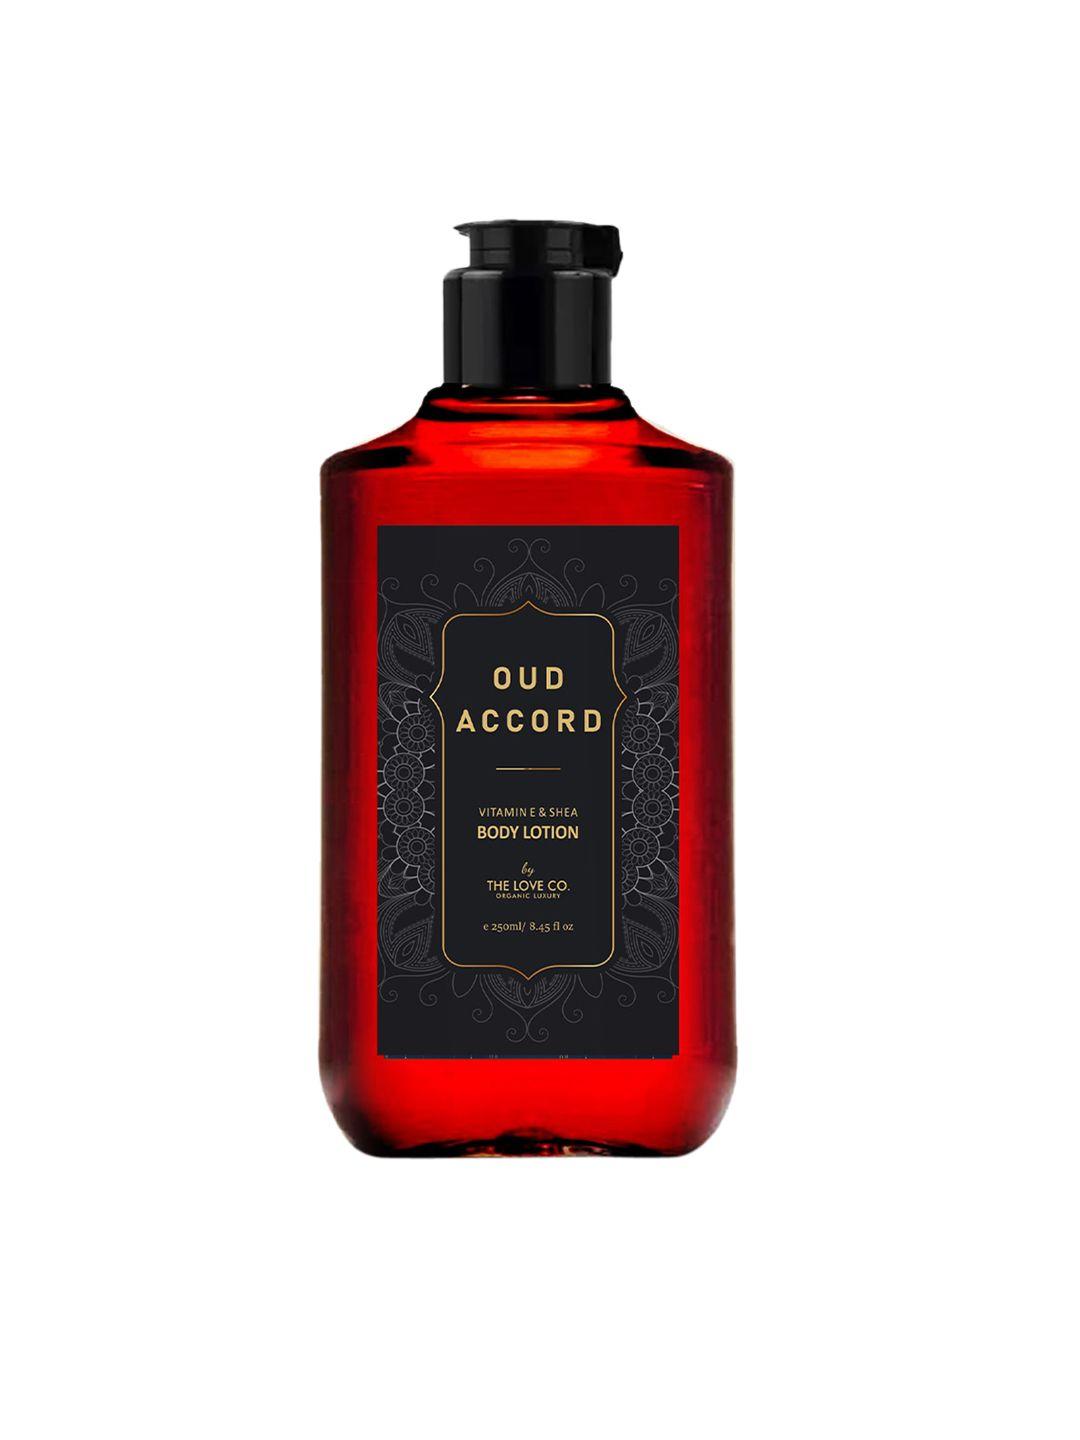 the love co. oud accord body lotion 250ml